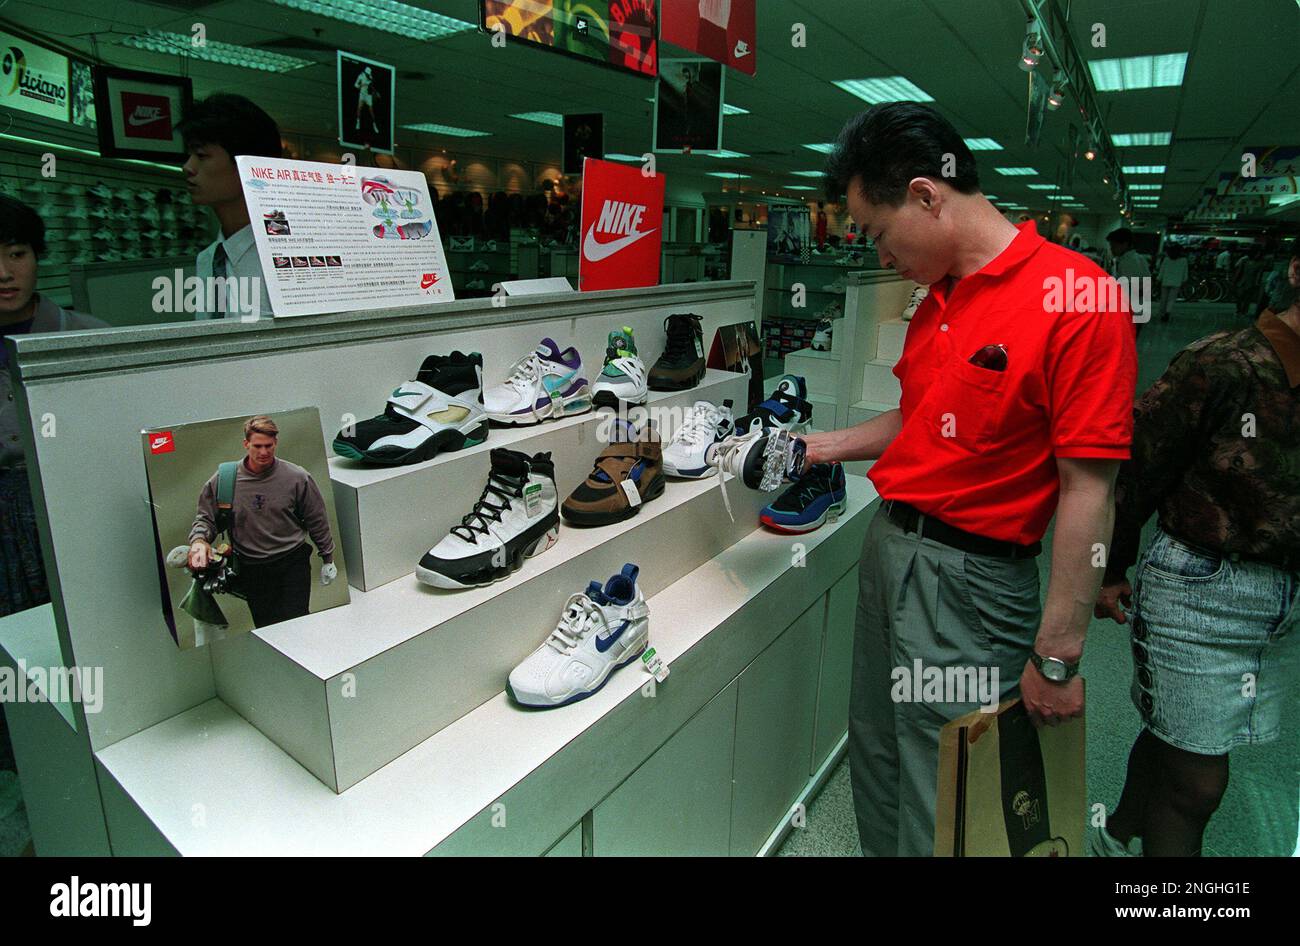 A Chinese shopper looks at Nike shoes on sale in a Beijing department  store, Thursday, May 26, 1994. U.S. President Bill Clinton is expected to  renew the Most Favored Nation trading status